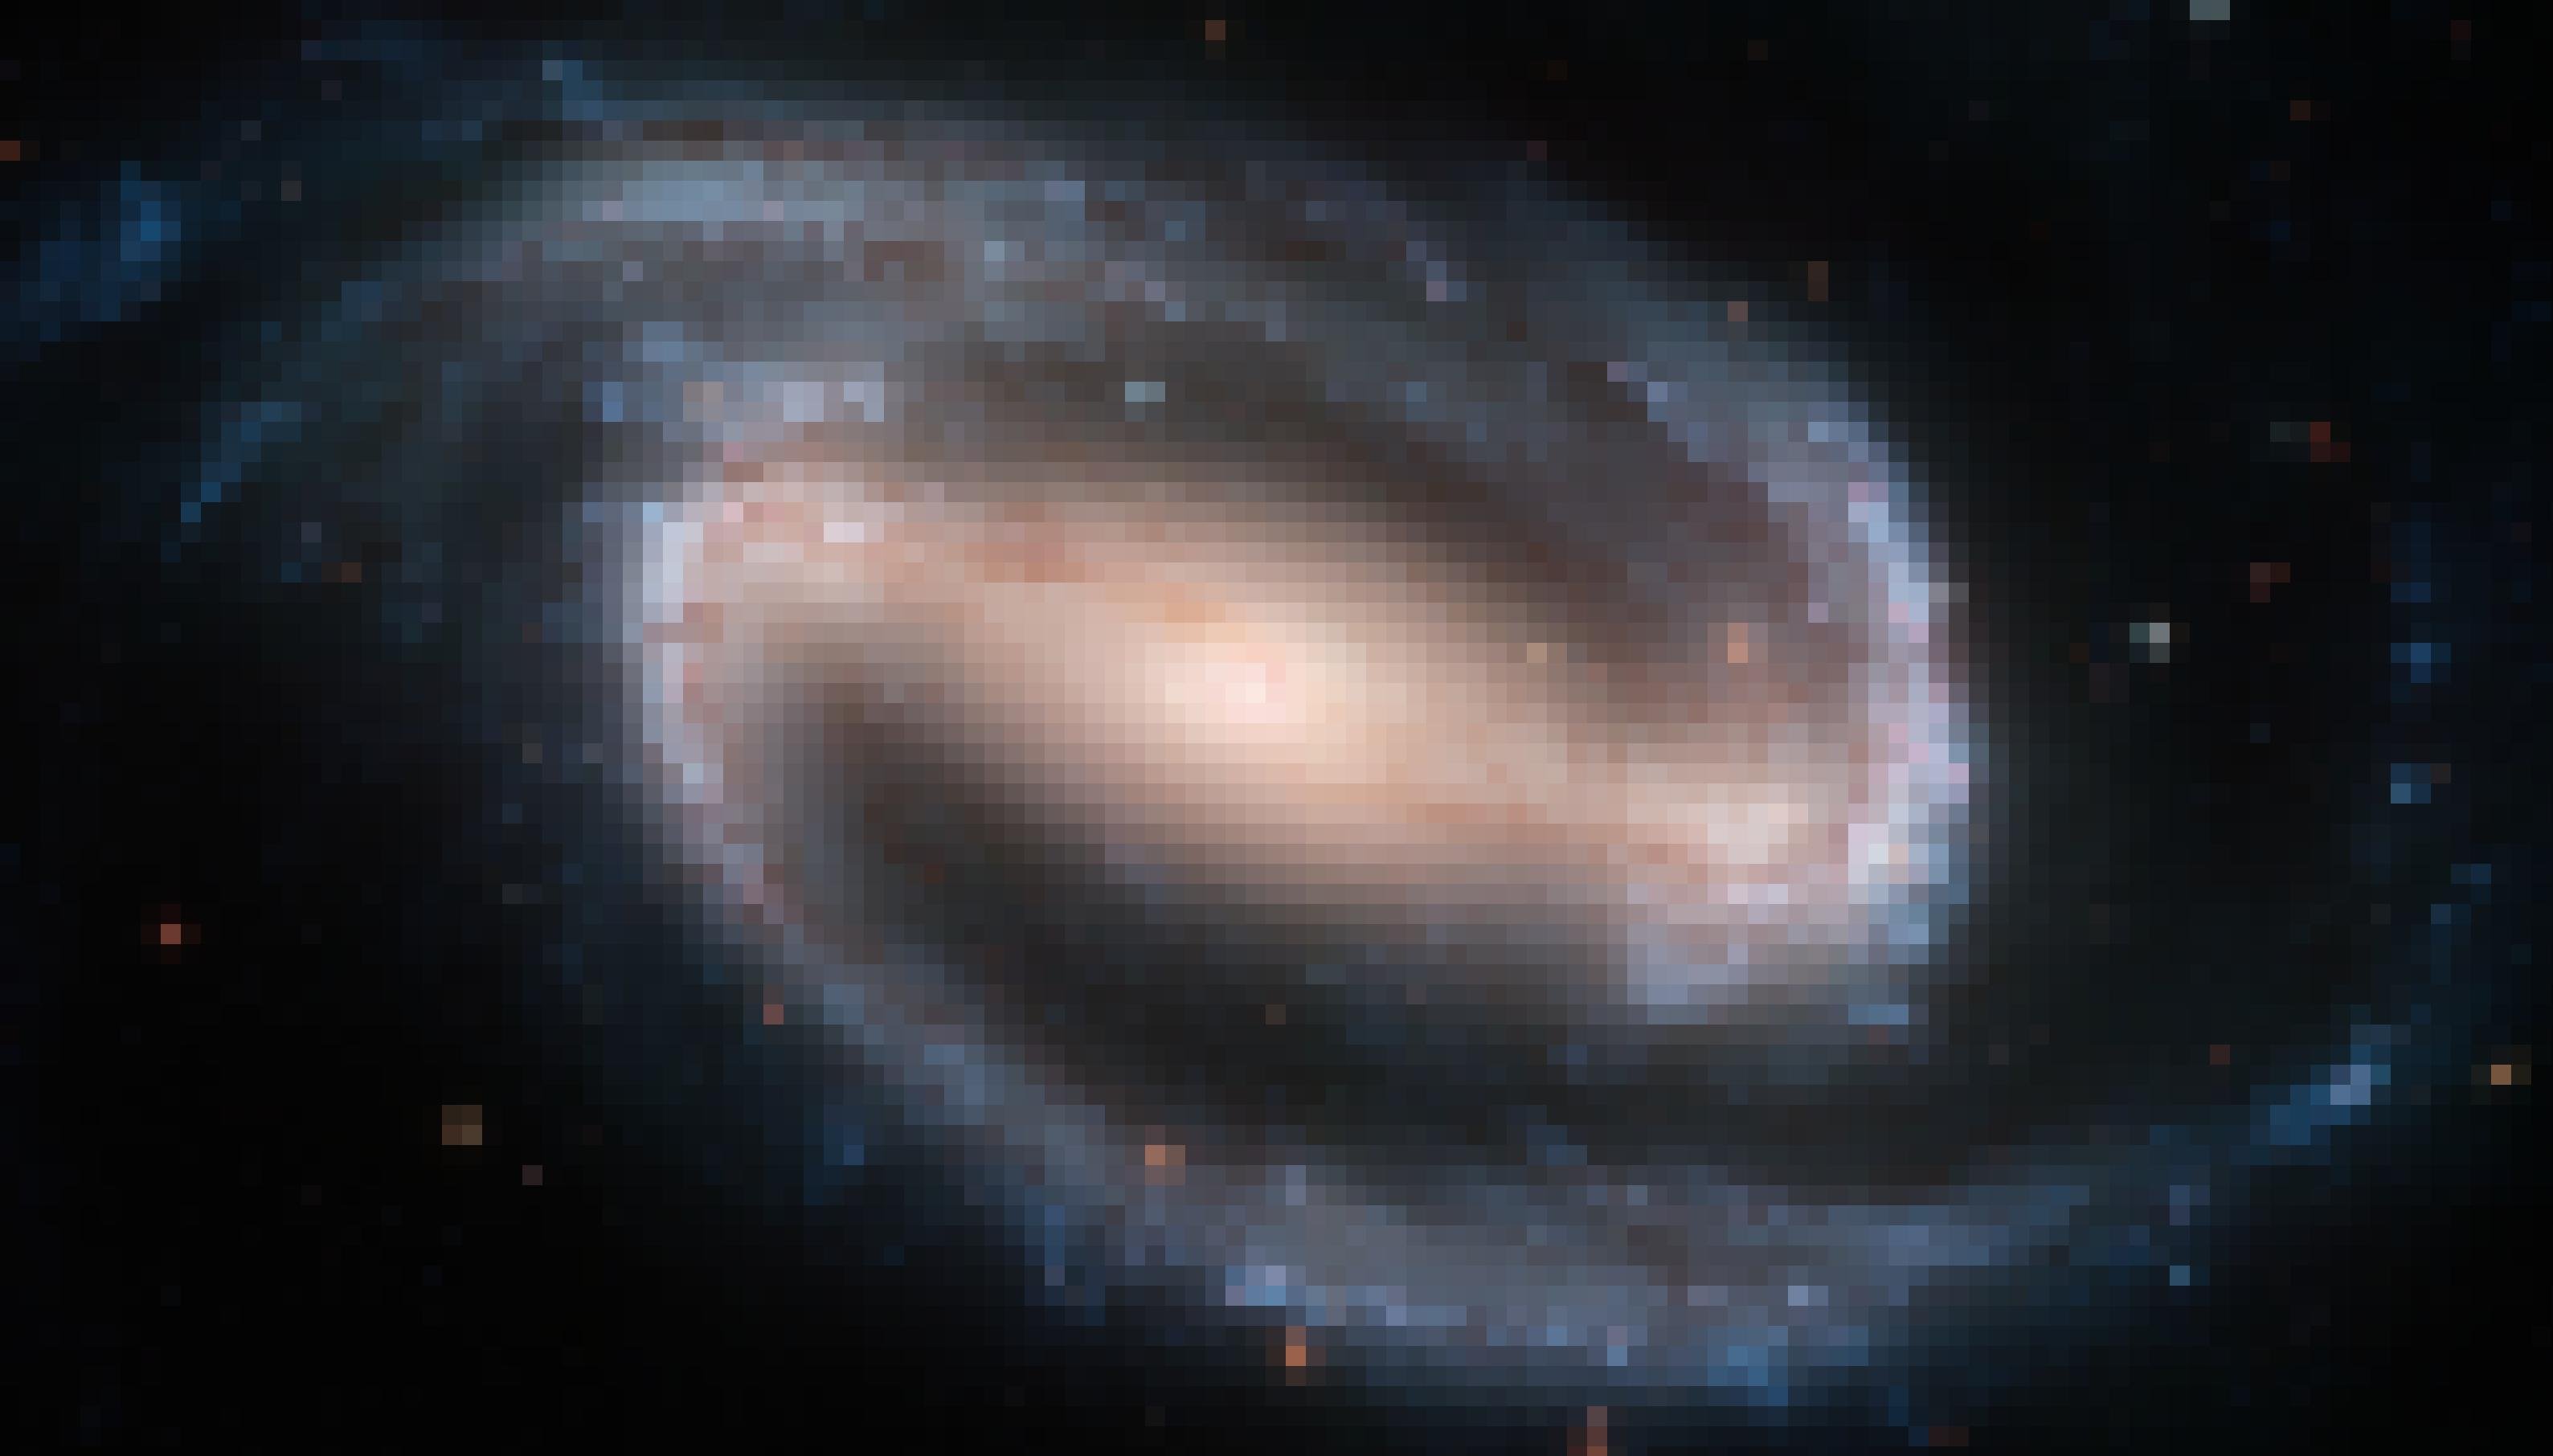 One of the largest Hubble Space Telescope images ever made of a complete galaxy is being unveiled today at the American Astronomical Society meeting in San Diego, Calif. The Hubble telescope captured a display of starlight, glowing gas, and silhouetted dark clouds of interstellar dust in this 4-foot-by-8-foot image of the barred spiral galaxy NGC 1300. NGC 1300 is considered to be prototypical of barred spiral galaxies. Barred spirals differ from normal spiral galaxies in that the arms of the galaxy do not spiral all the way into the center, but are connected to the two ends of a straight bar of stars containing the nucleus at its center.